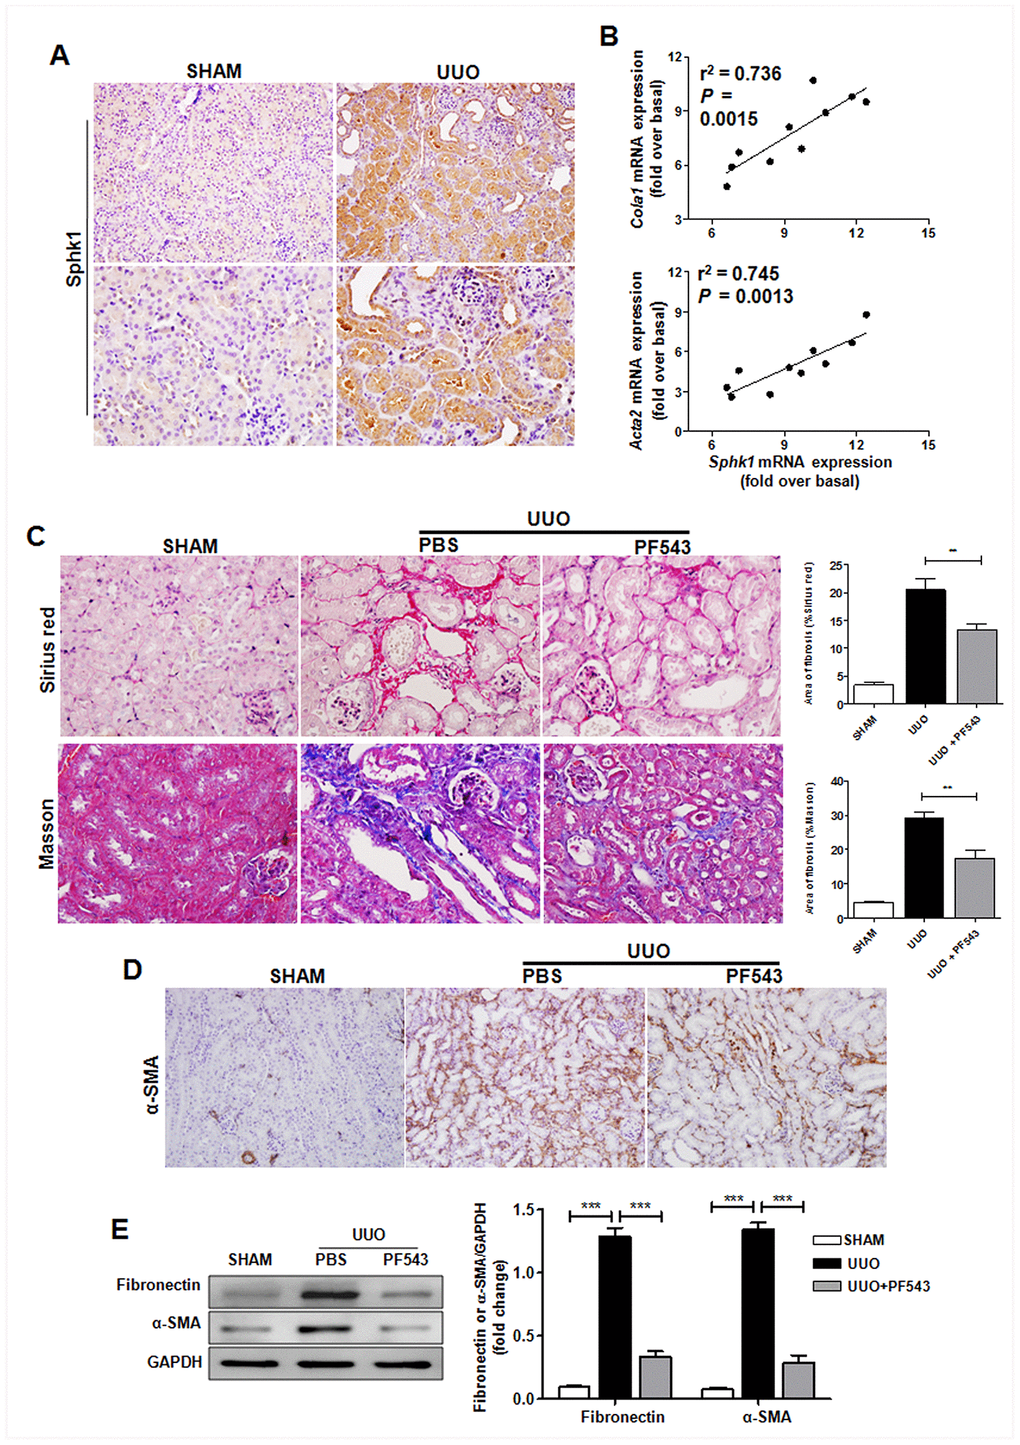 Sphk1 is critical for UUO-induced kidney fibrosis in mice. (A) Sphk1 expression in kidney tissues of Tnfsf14+/+ mice after UUO surgery for 7 days was measured by immunohistochemistry (upper lane, original magnification ×200; lower lane, original magnification ×400). (B) Linear regression showed a close correlation between Sphk1 mRNA expression and Cola1 and Acta2 mRNA expression in kidney tissues of Tnfsf14+/+ mice after UUO surgery for 7 days. Spearman’s correlation coefficient and P value are shown (n = 10). (C–E) After UUO surgery, PF543 (1 mg/kg/day) was injected intraperitoneally for consecutive 7 days, and then kidney tissues were collected from each group. (C) Sirius Red and Masson staining of kidney tissues sections. Original magnification ×400. (D) α-SMA expression in kidney tissues was measured by immunohistochemistry. Original magnification ×200. (E) Western blot analyses of renal fibronectin and α-SMA protein in kidney tissues. Representative western blot (Left and quantitative data (Right) are presented. Sham group was used as the control of UUO. The data were representative of the results of three independent experiments. All values are represented as means ± SEM. n = 5 per group. ***P 